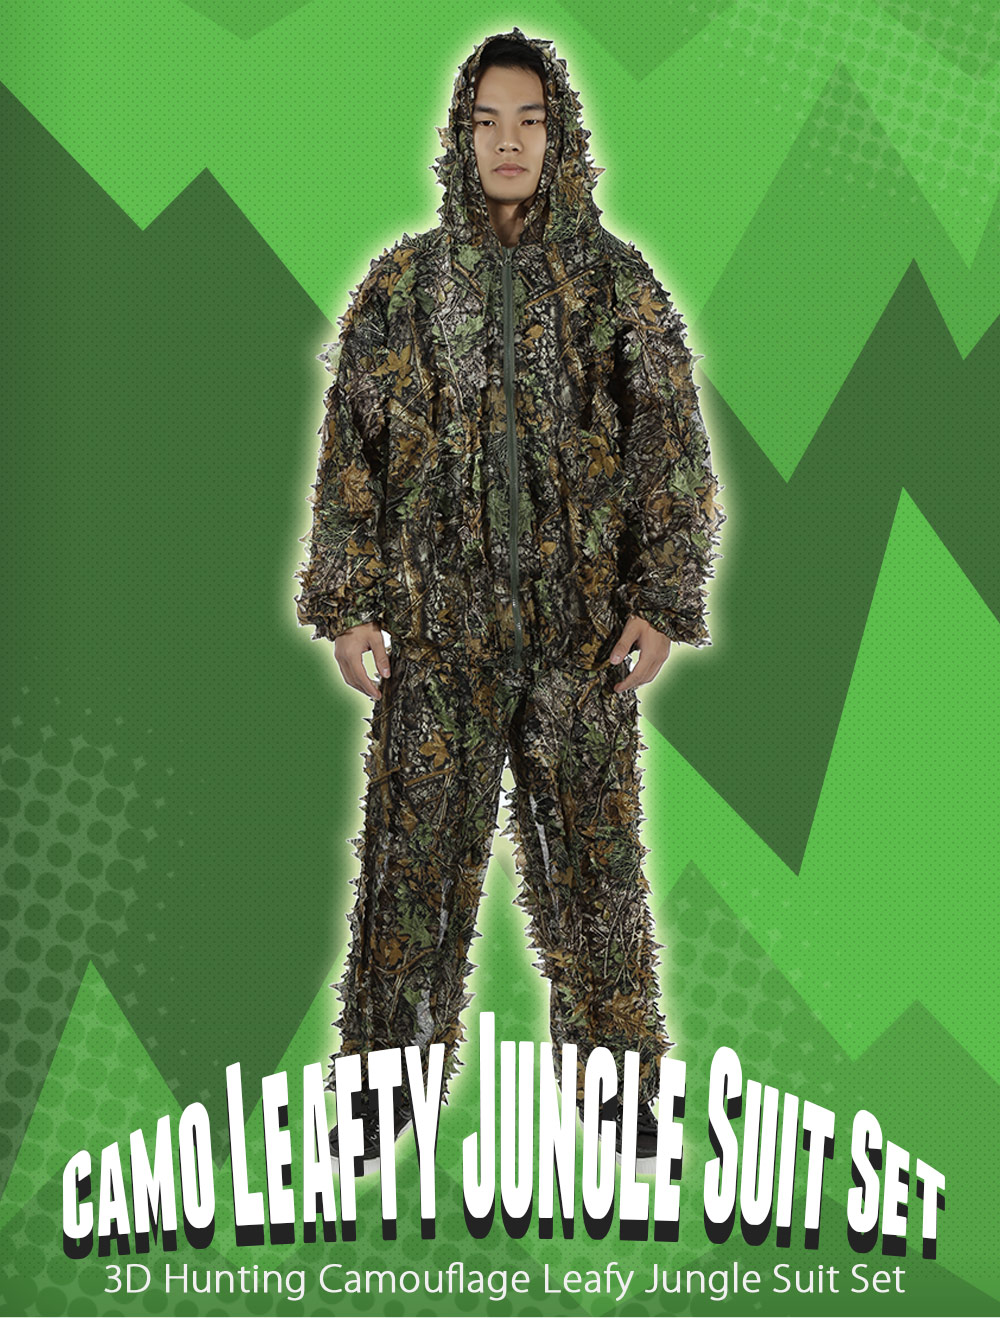 3D Camouflage Clothing Leafy Jungle Suit Set for Hunting Birding